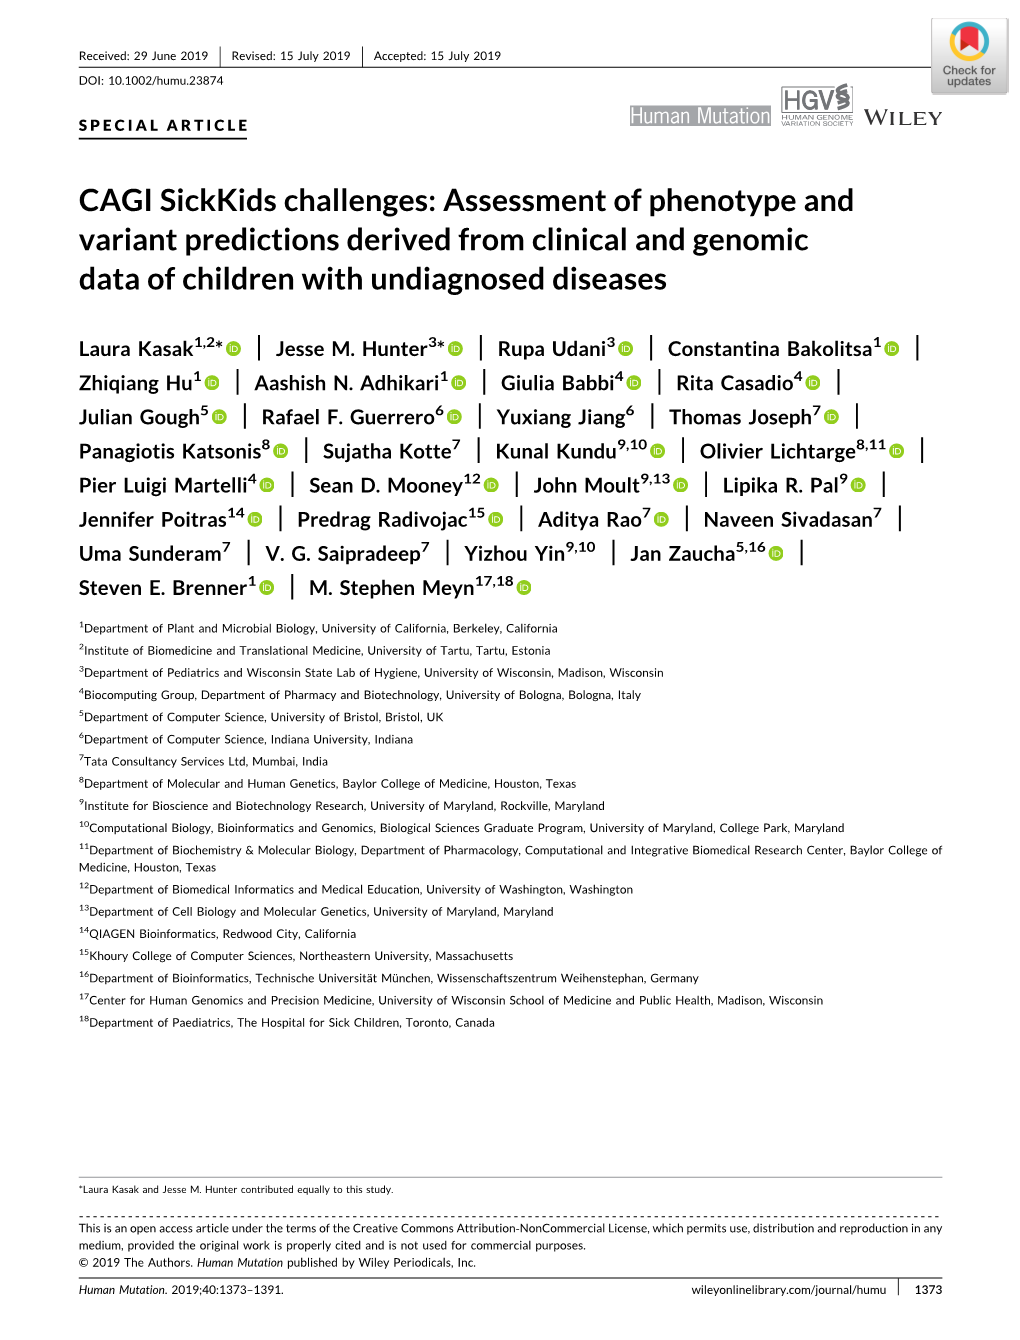 CAGI Sickkids Challenges: Assessment of Phenotype and Variant Predictions Derived from Clinical and Genomic Data of Children with Undiagnosed Diseases